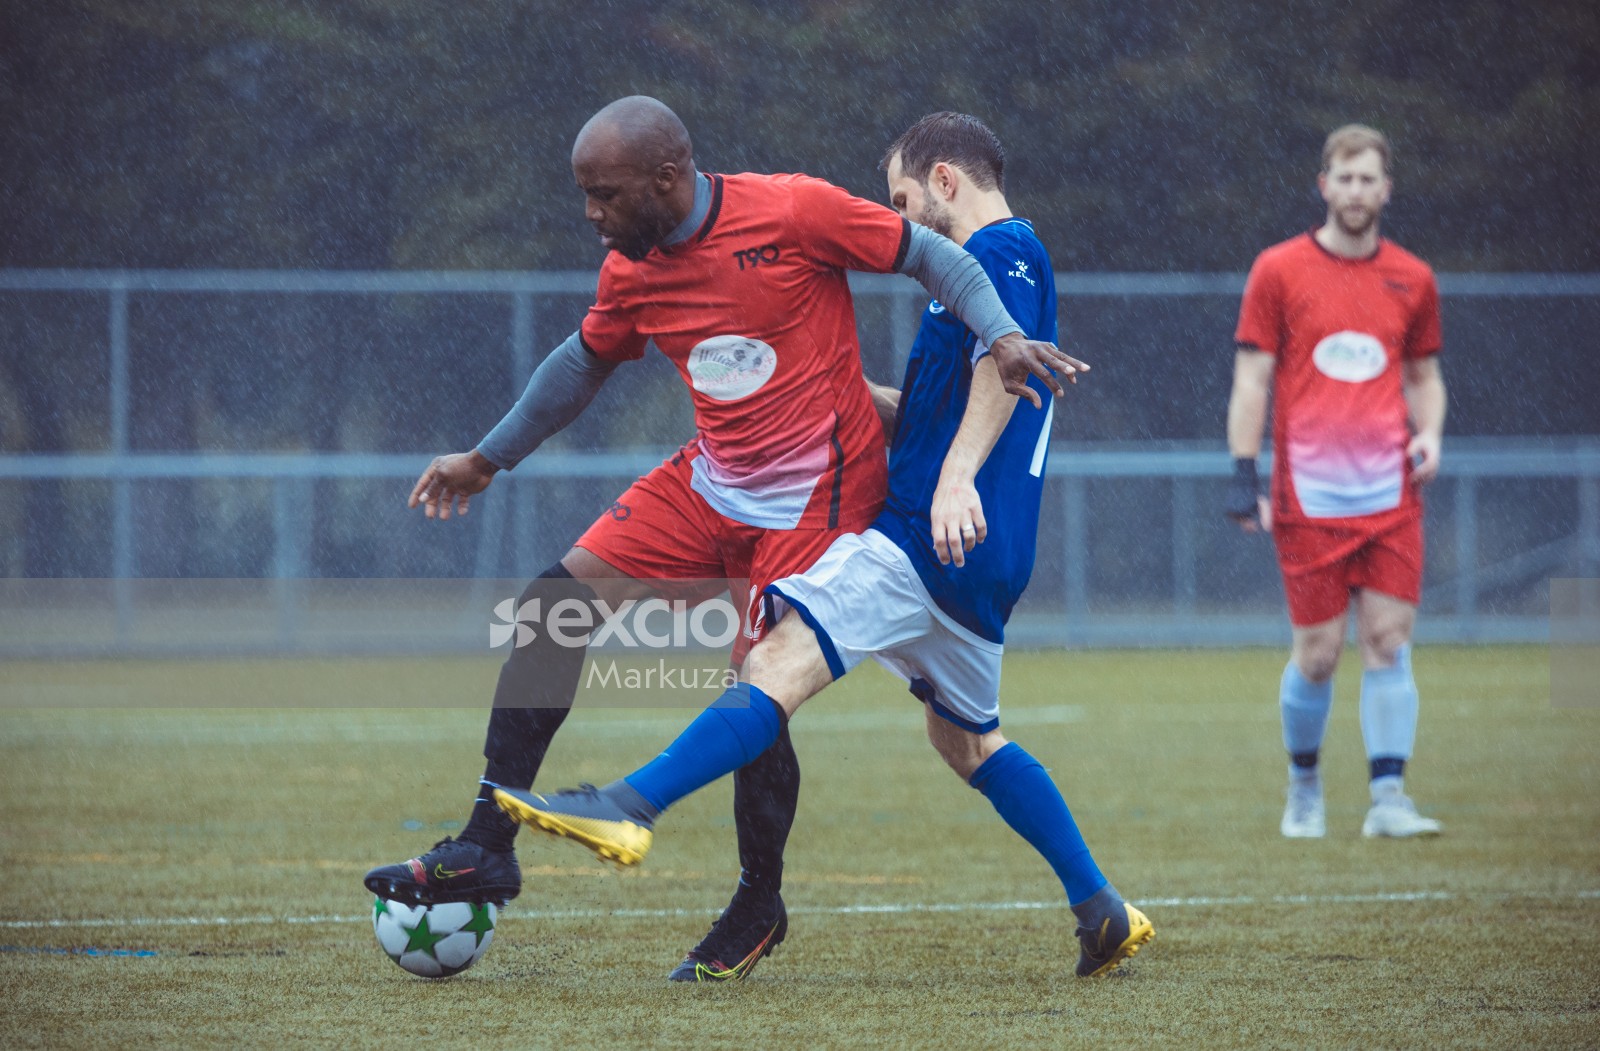 Player in blue shirt tackling opponent in red shirt in the rain - Sports Zone sunday league